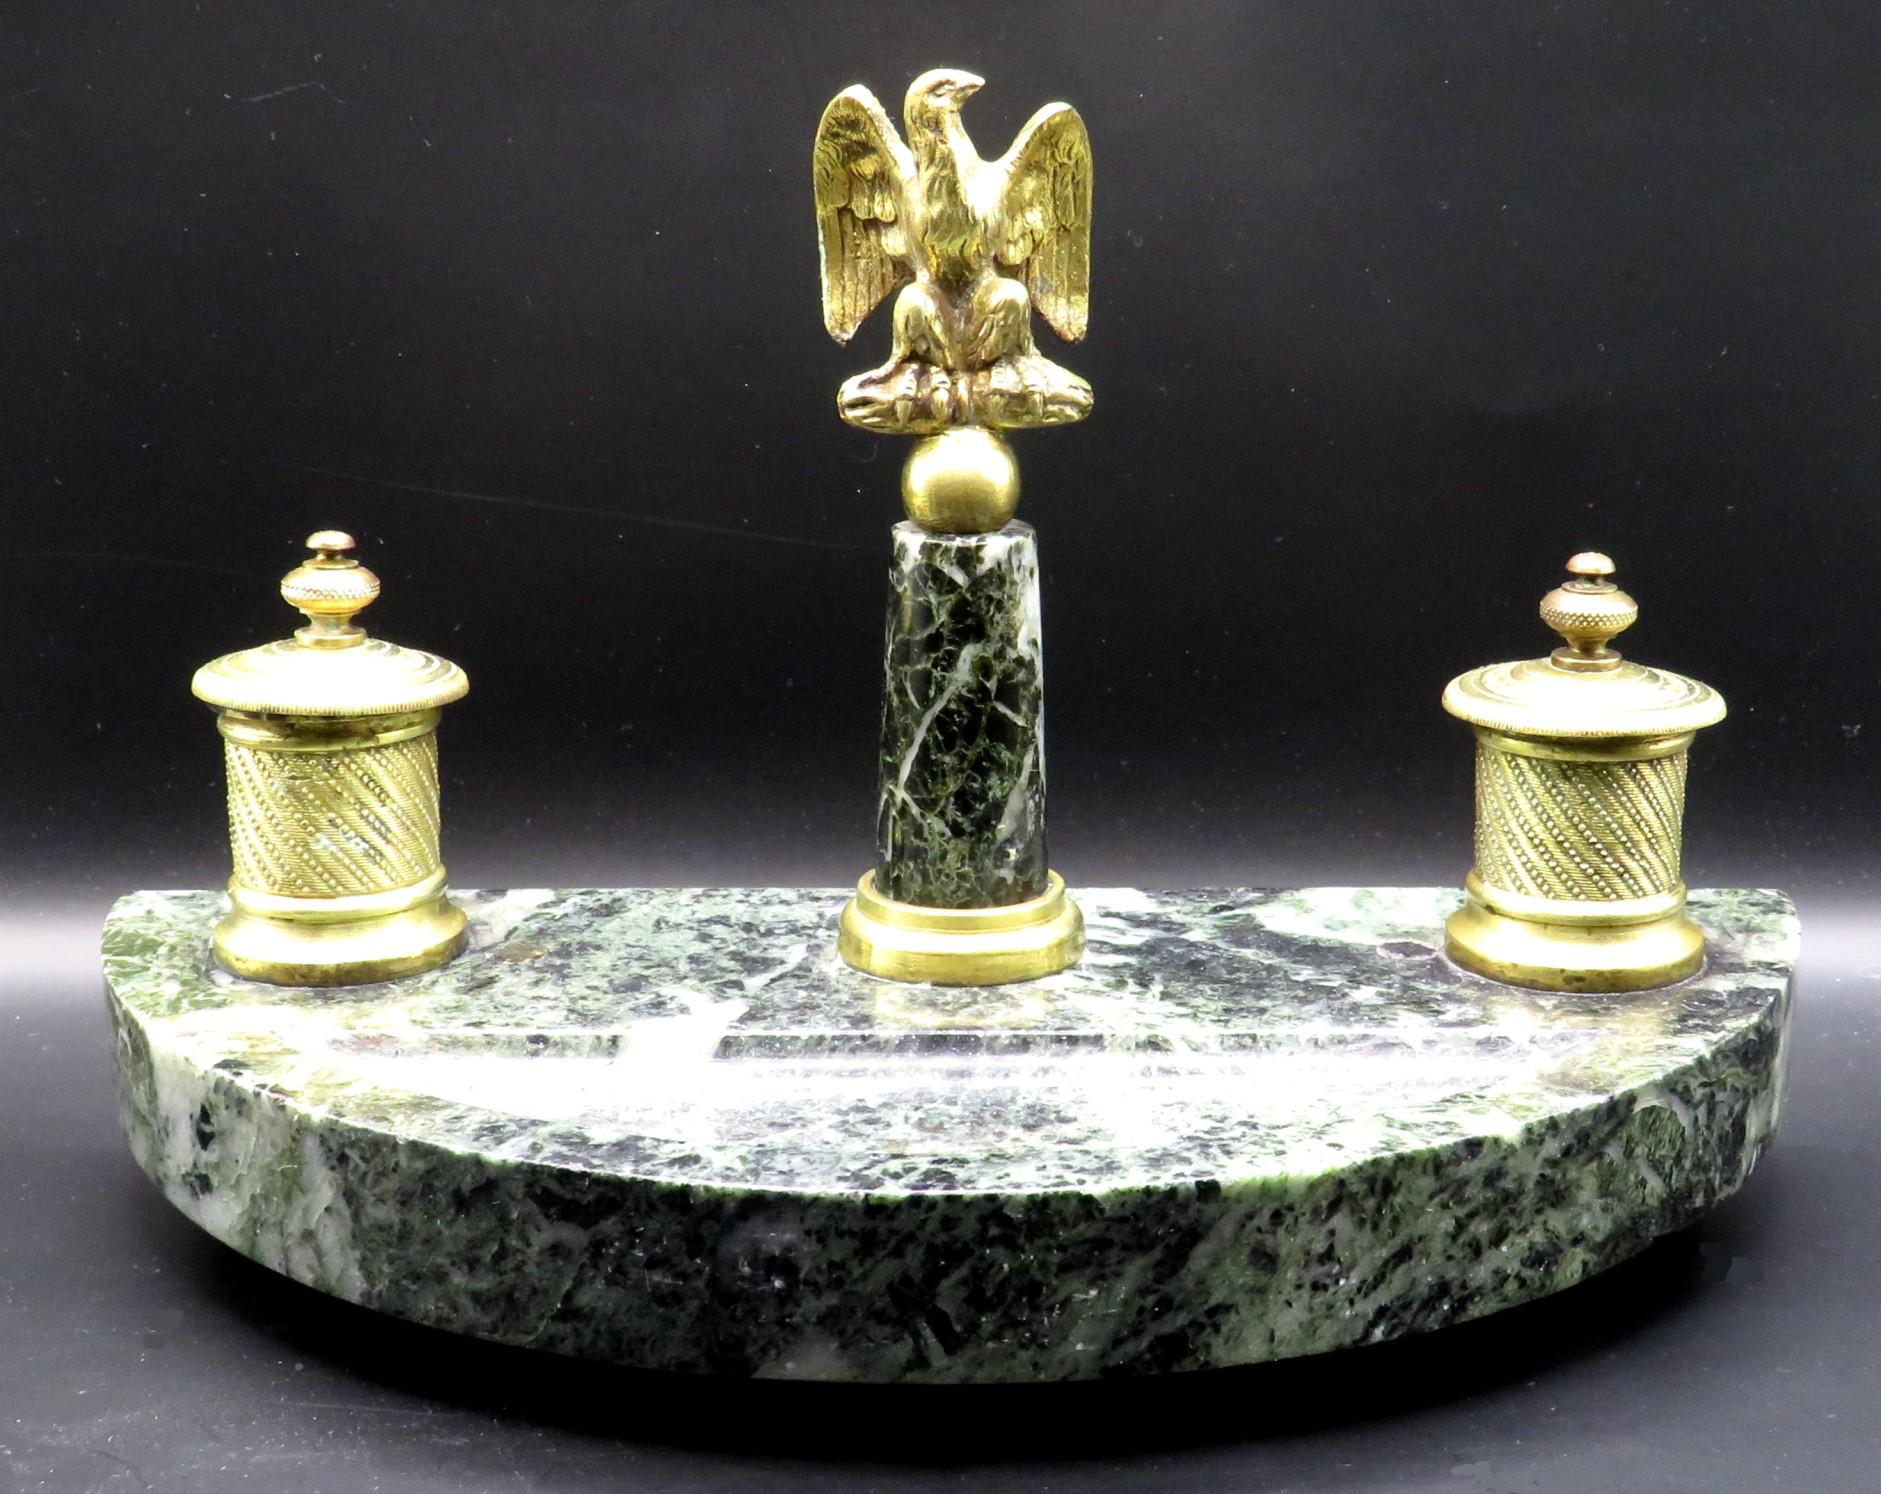 The crescent shaped & dished ‘verdi alpi’ marble base affixed with a pair of lidded gilt bronze inkpots (glass inkwells absent), decorated with fine engine turned detail, flanking a marble column surmounted by an impressive gilt bronze eagle final